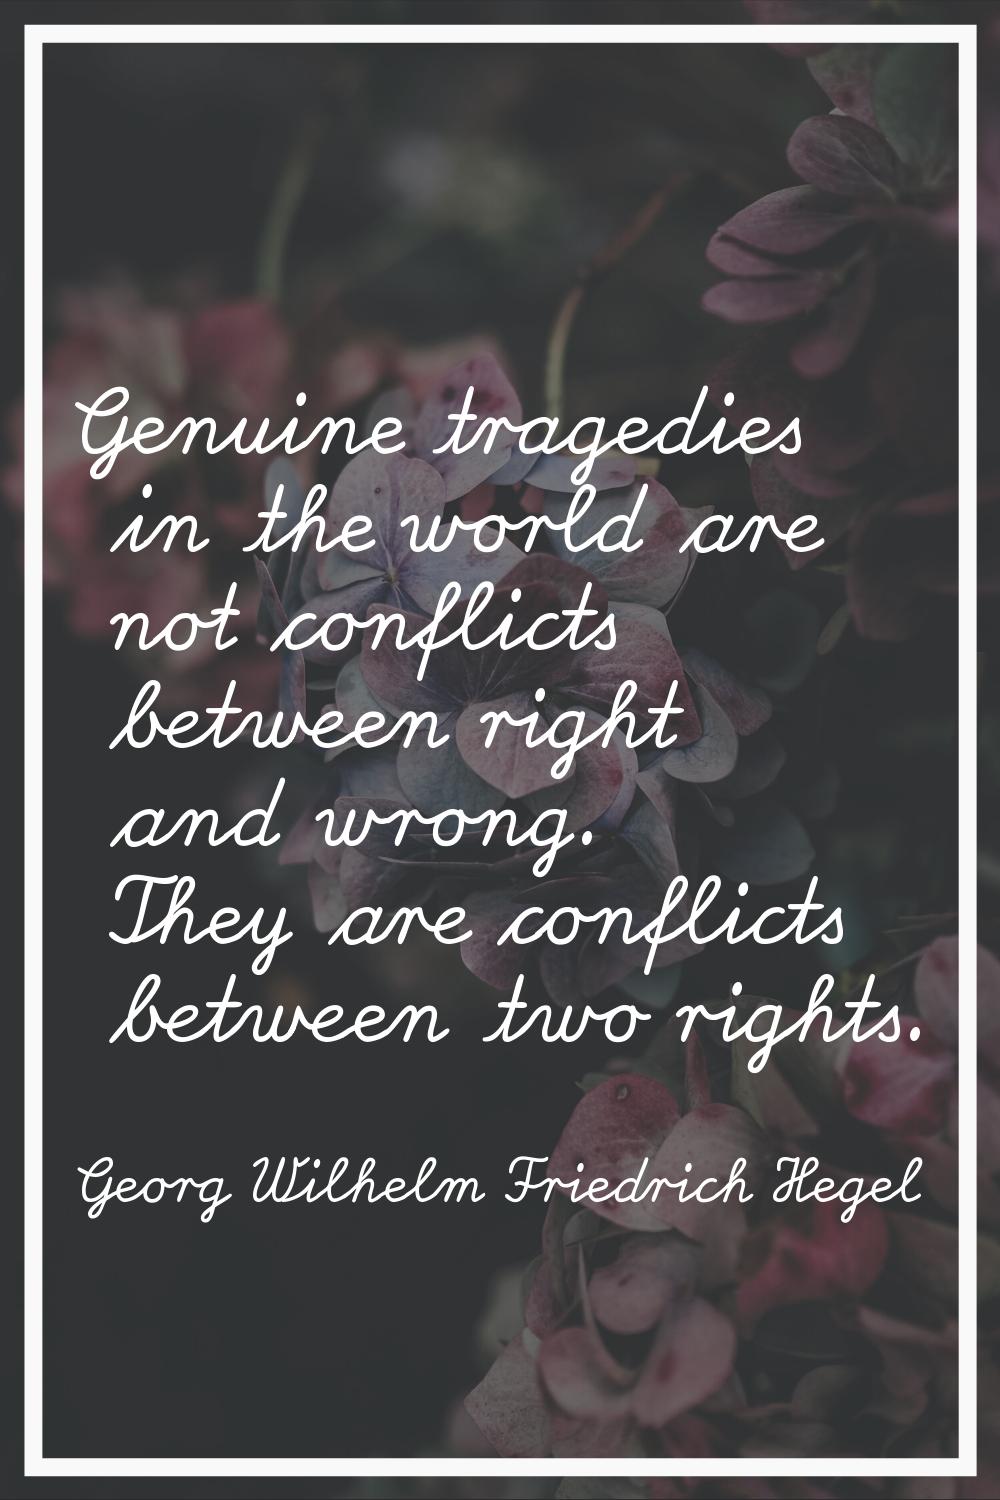 Genuine tragedies in the world are not conflicts between right and wrong. They are conflicts betwee